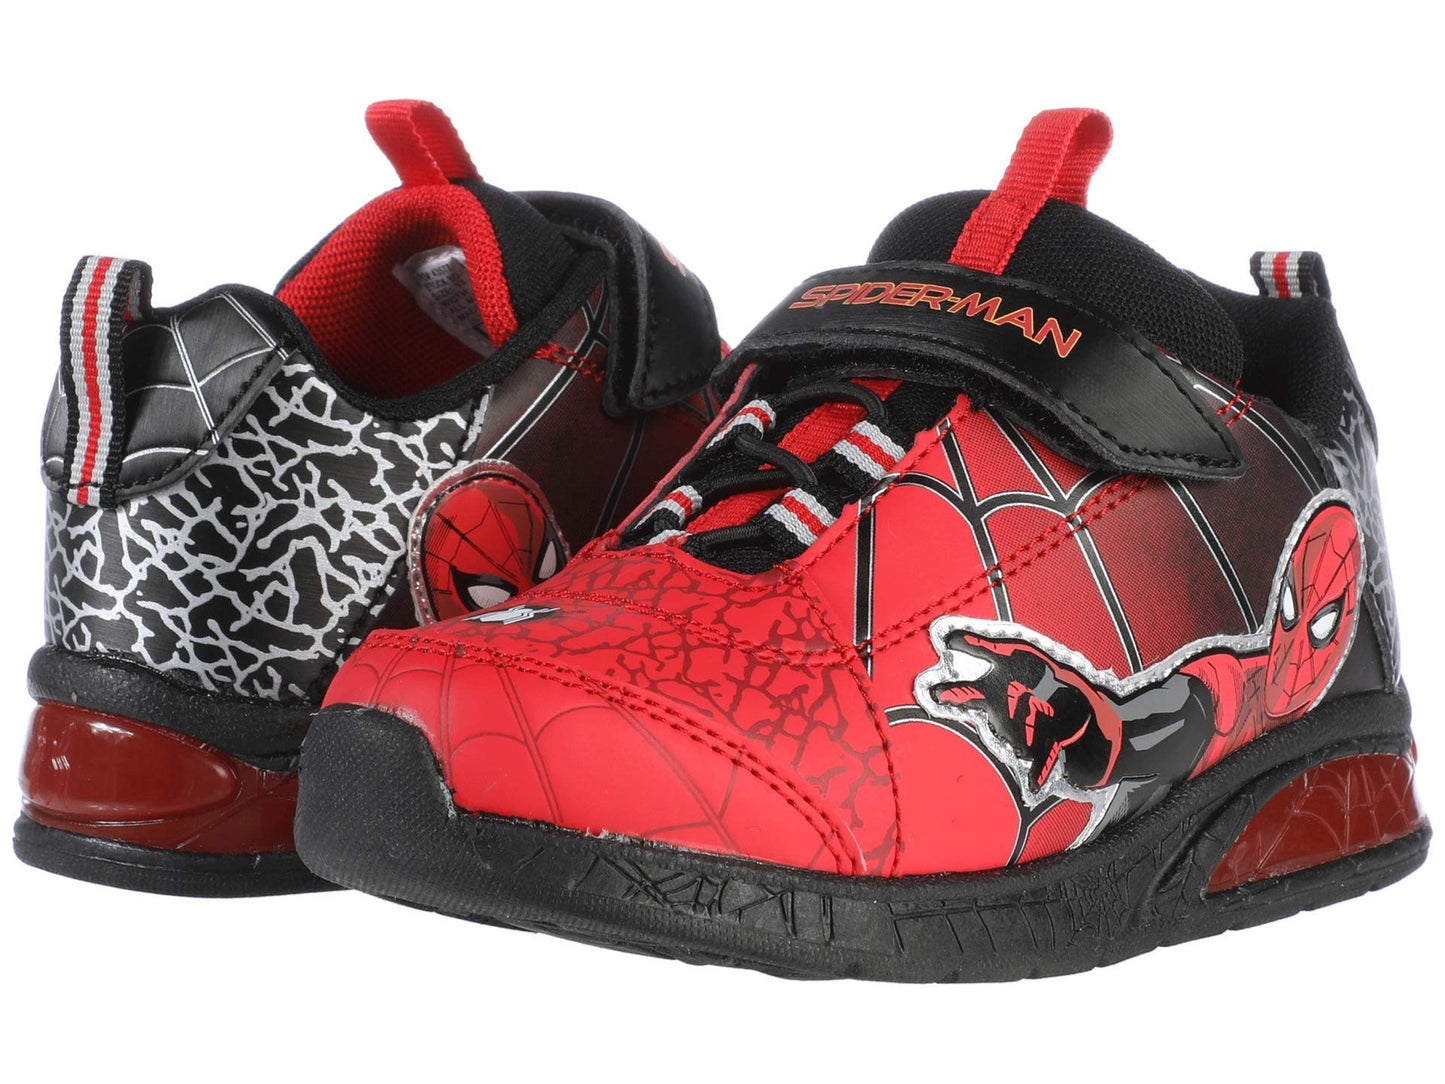 Favorite Characters Boy's Spiderman Lighted Athletic SPS387 (Toddler/Little Kid) Red 12 Little Kid M